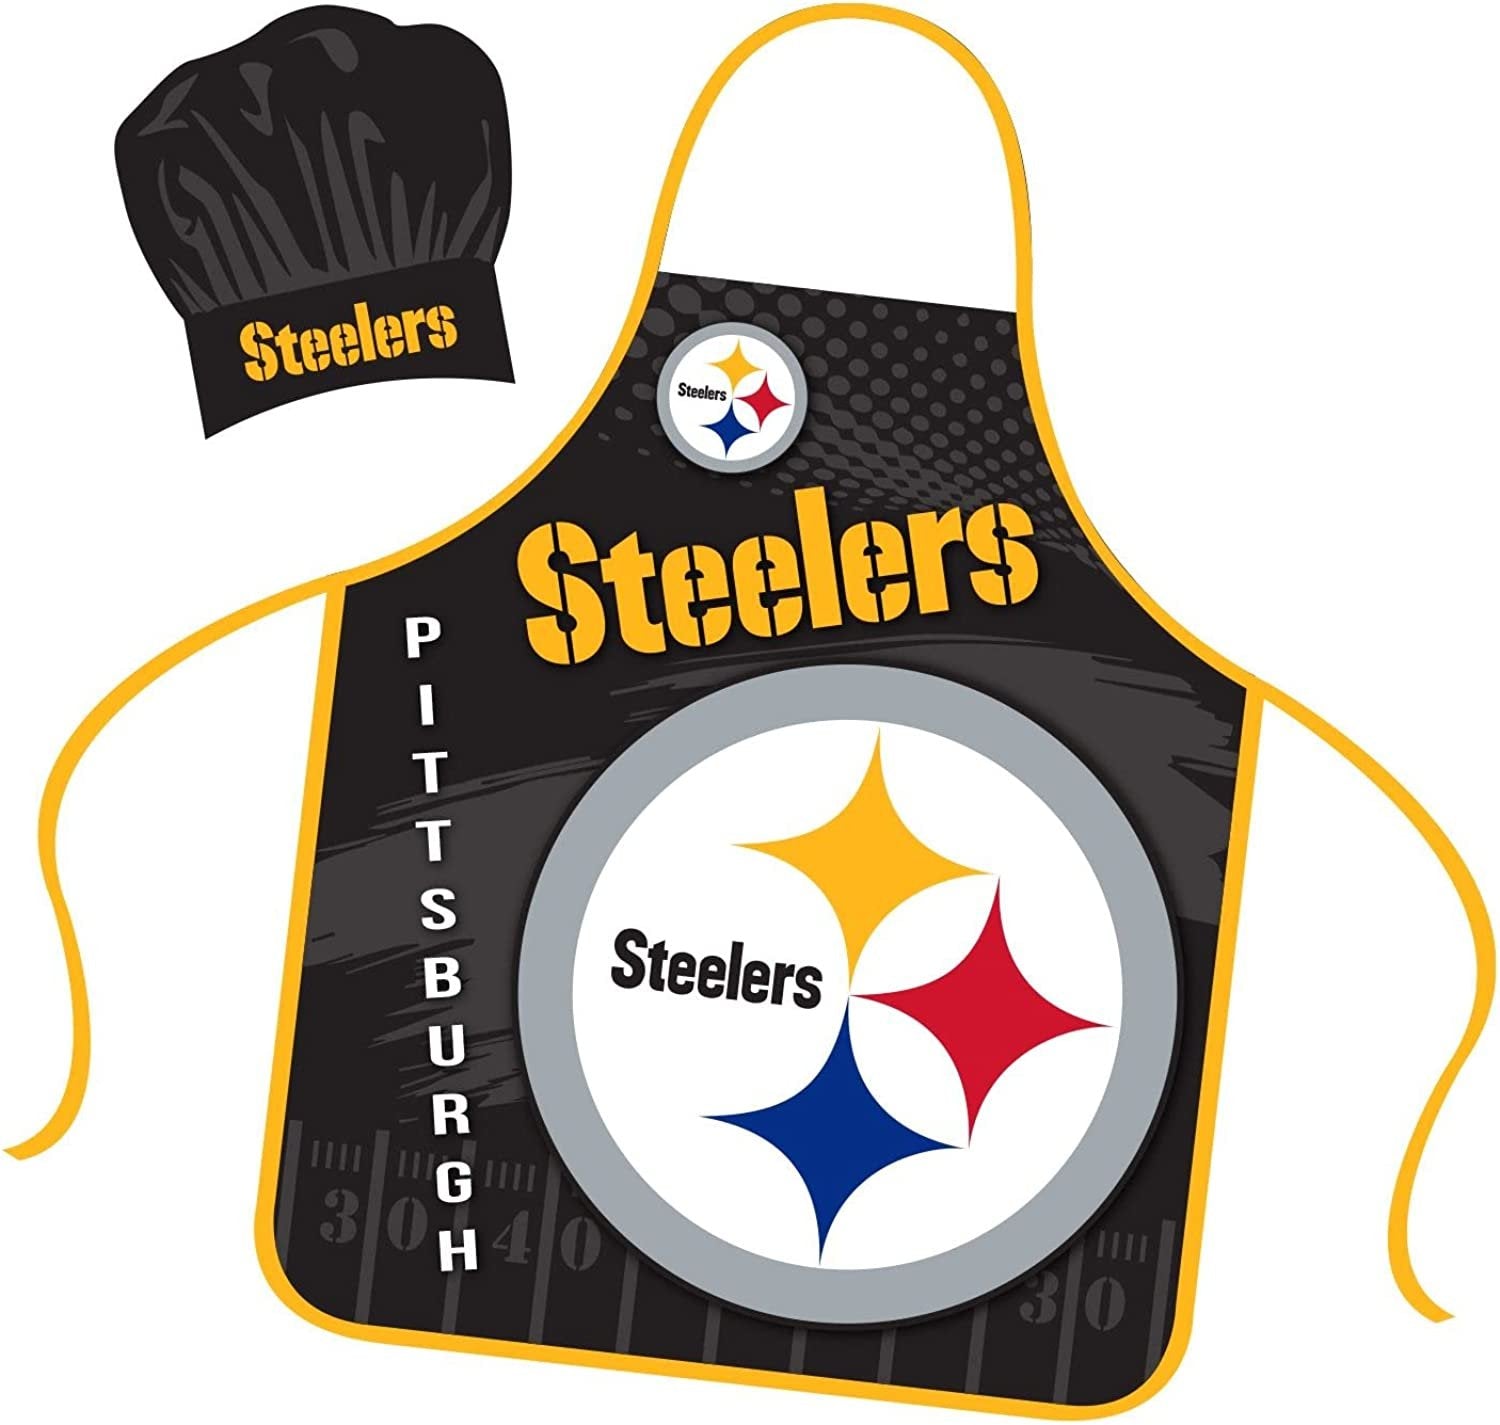 Pittsburgh Steelers Apron Chef Hat Set Full Color Universal Size Tie Back Grilling Tailgate BBQ Cooking Host